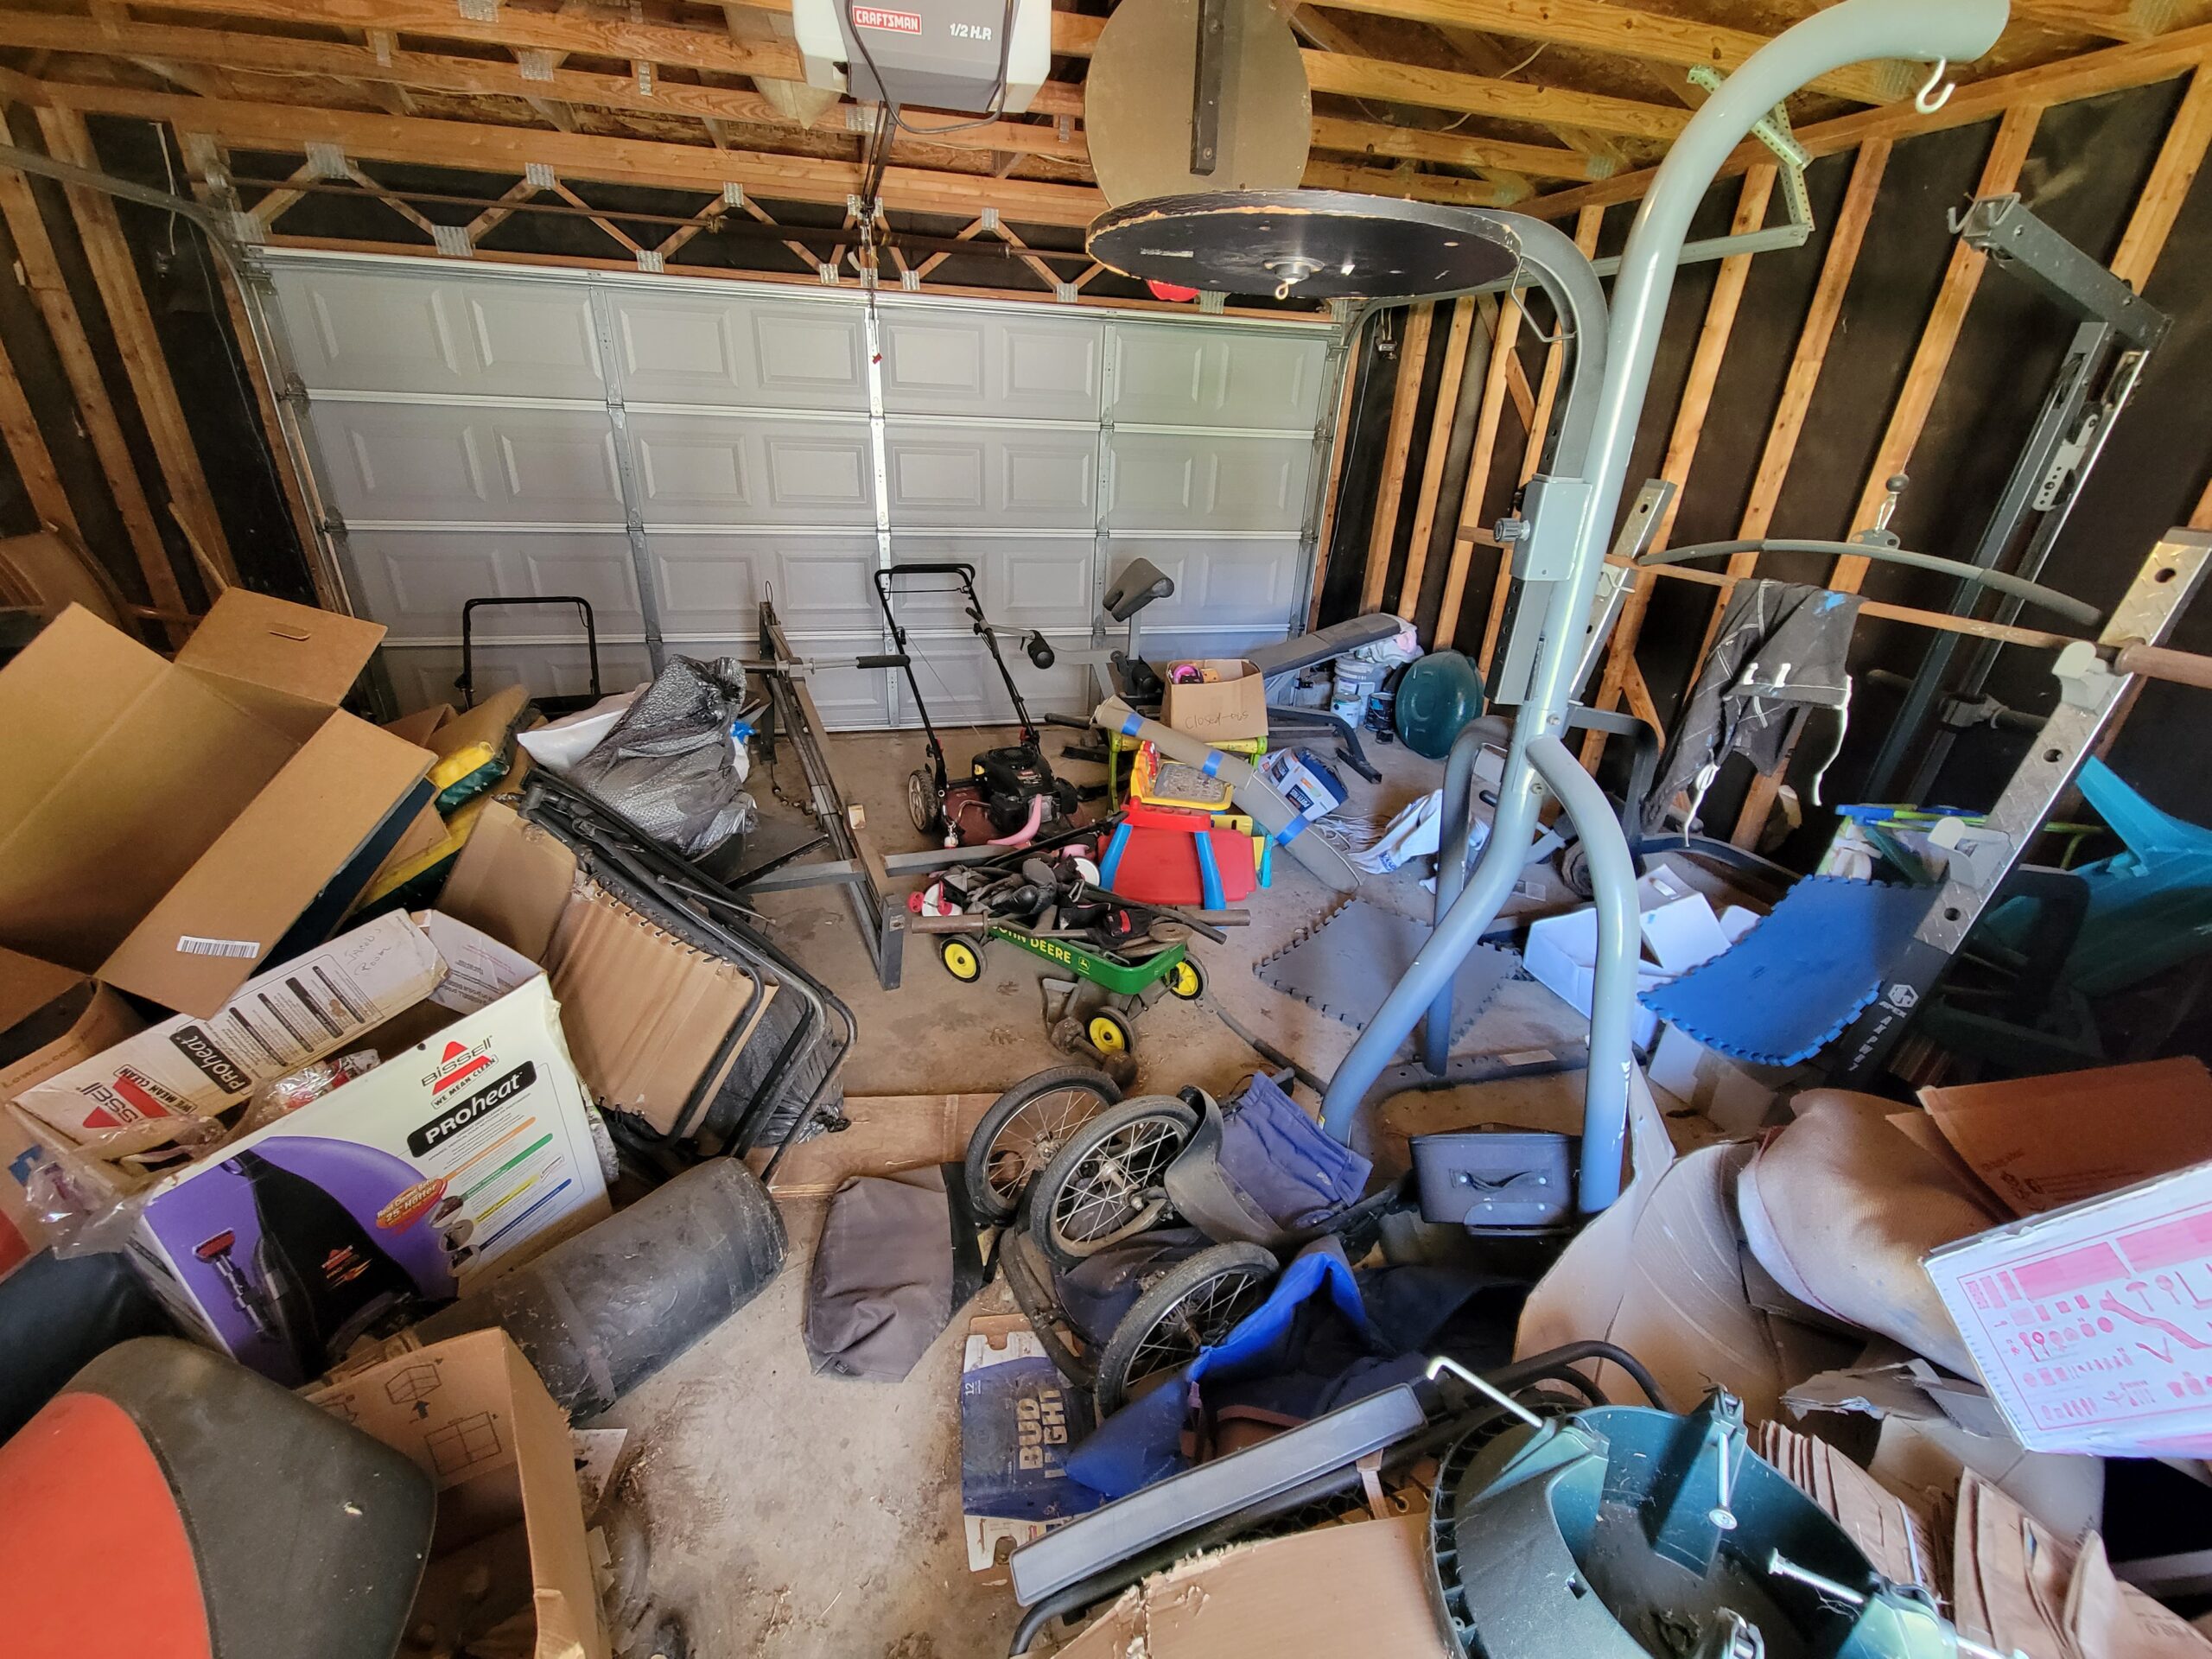 garage full of stuff and junk need clean out